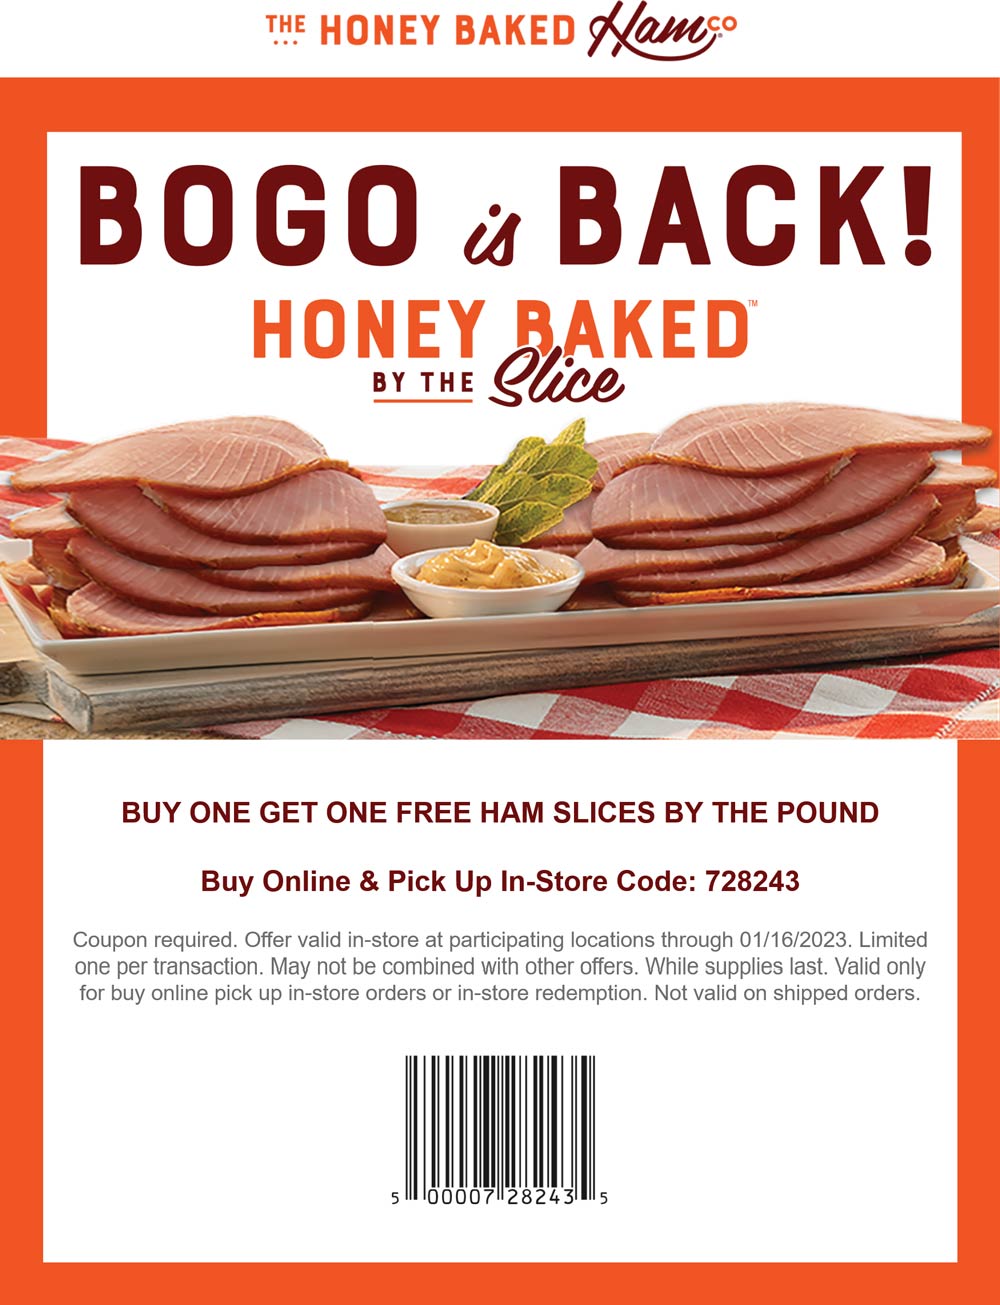 HoneyBaked coupons & promo code for [February 2023]